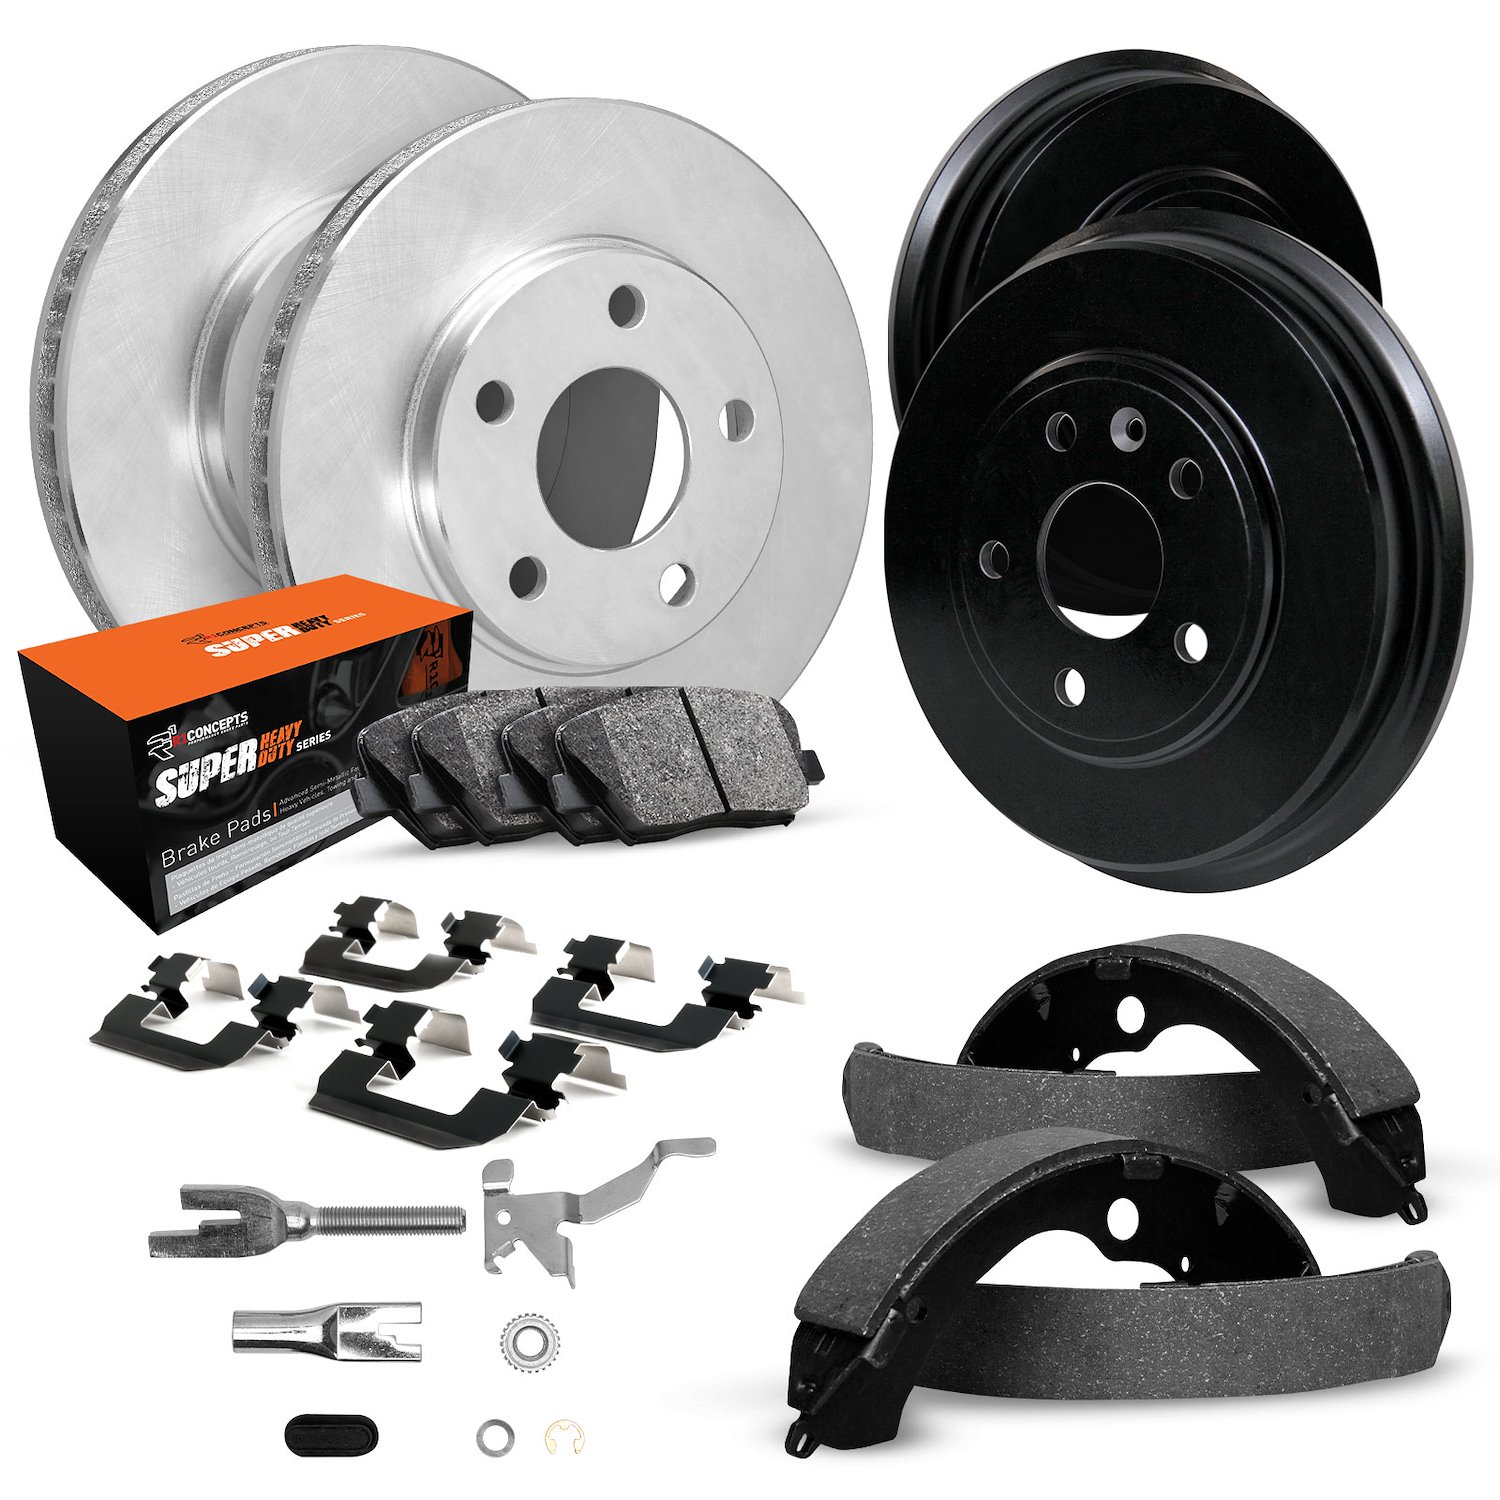 E-Line Blank Brake Rotor & Drum Set w/Super-Duty Pads, Shoes, Hardware, & Adjusters, 1986-1986 Ford/Lincoln/Mercury/Mazda